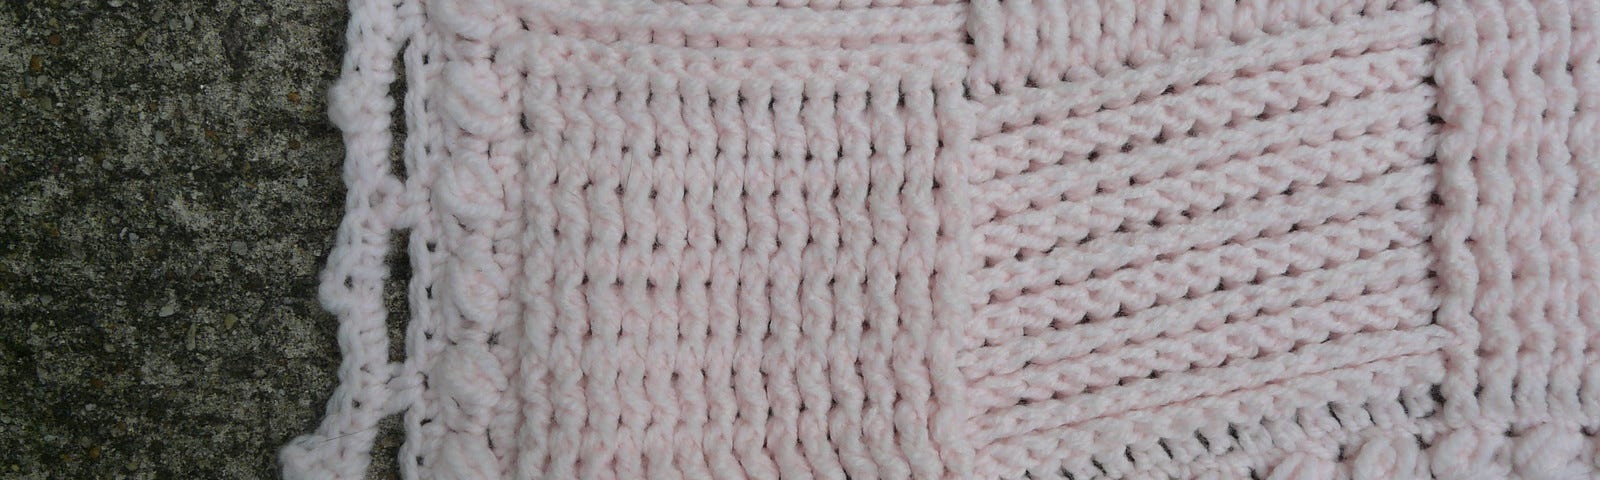 A pink crochet blanket worked in a textured basketweave stitch